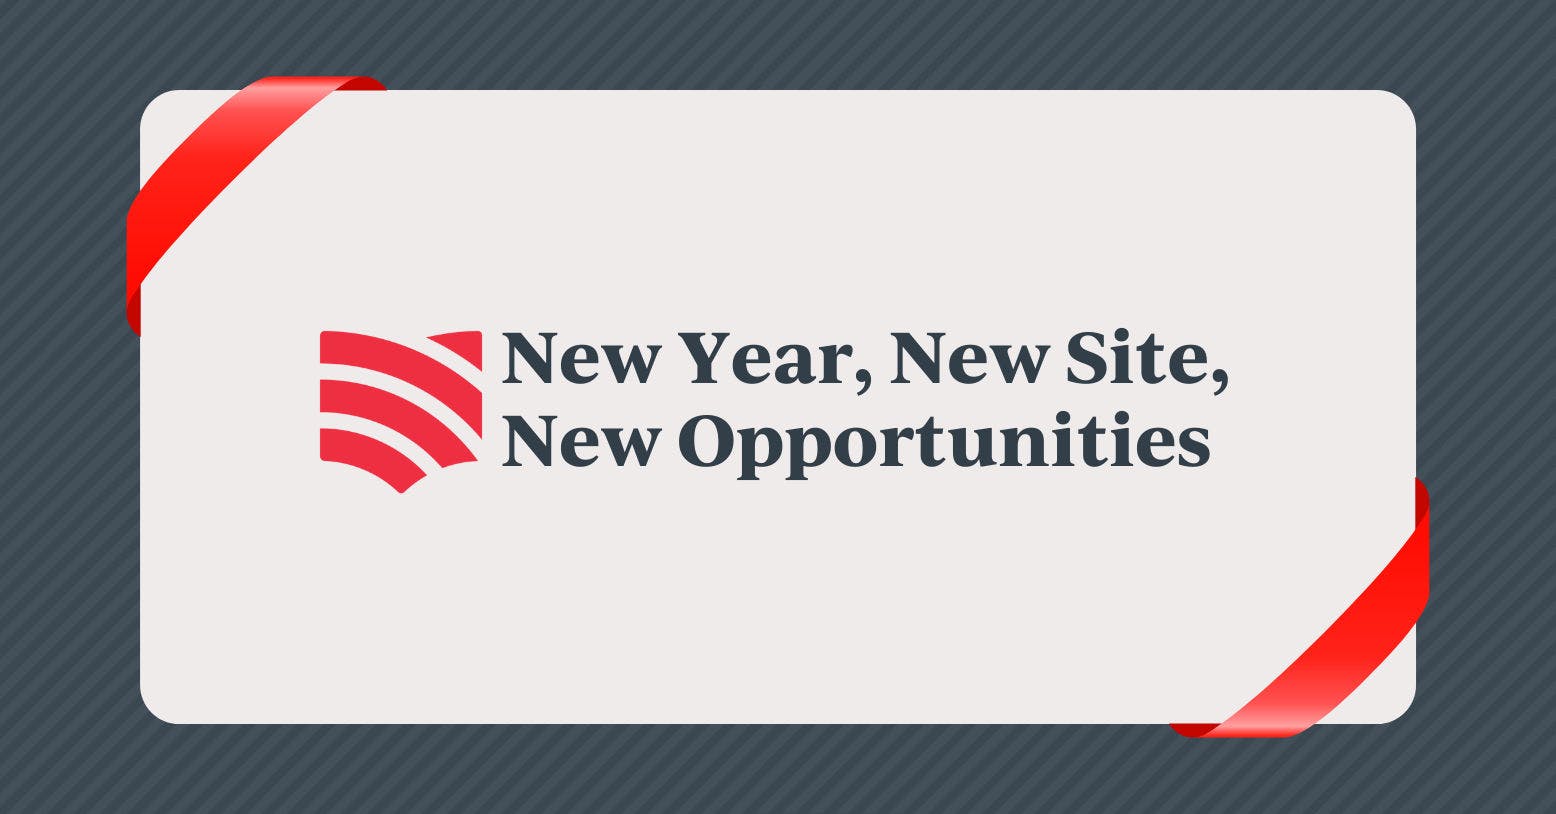 New Year, New Site, New Opportunities